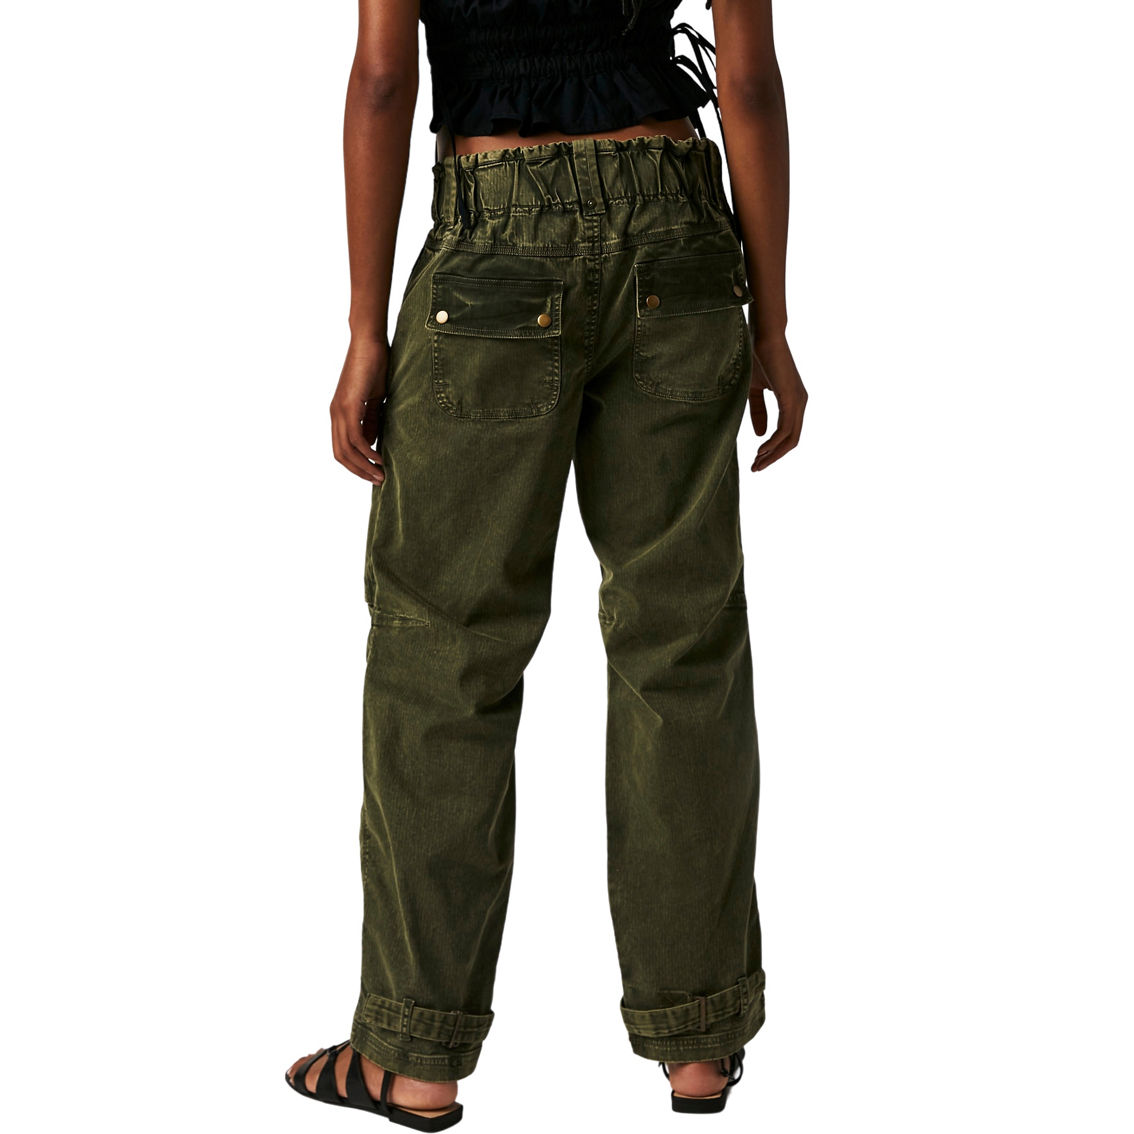 Free People Can't Compare Slouch Pants - Image 2 of 4